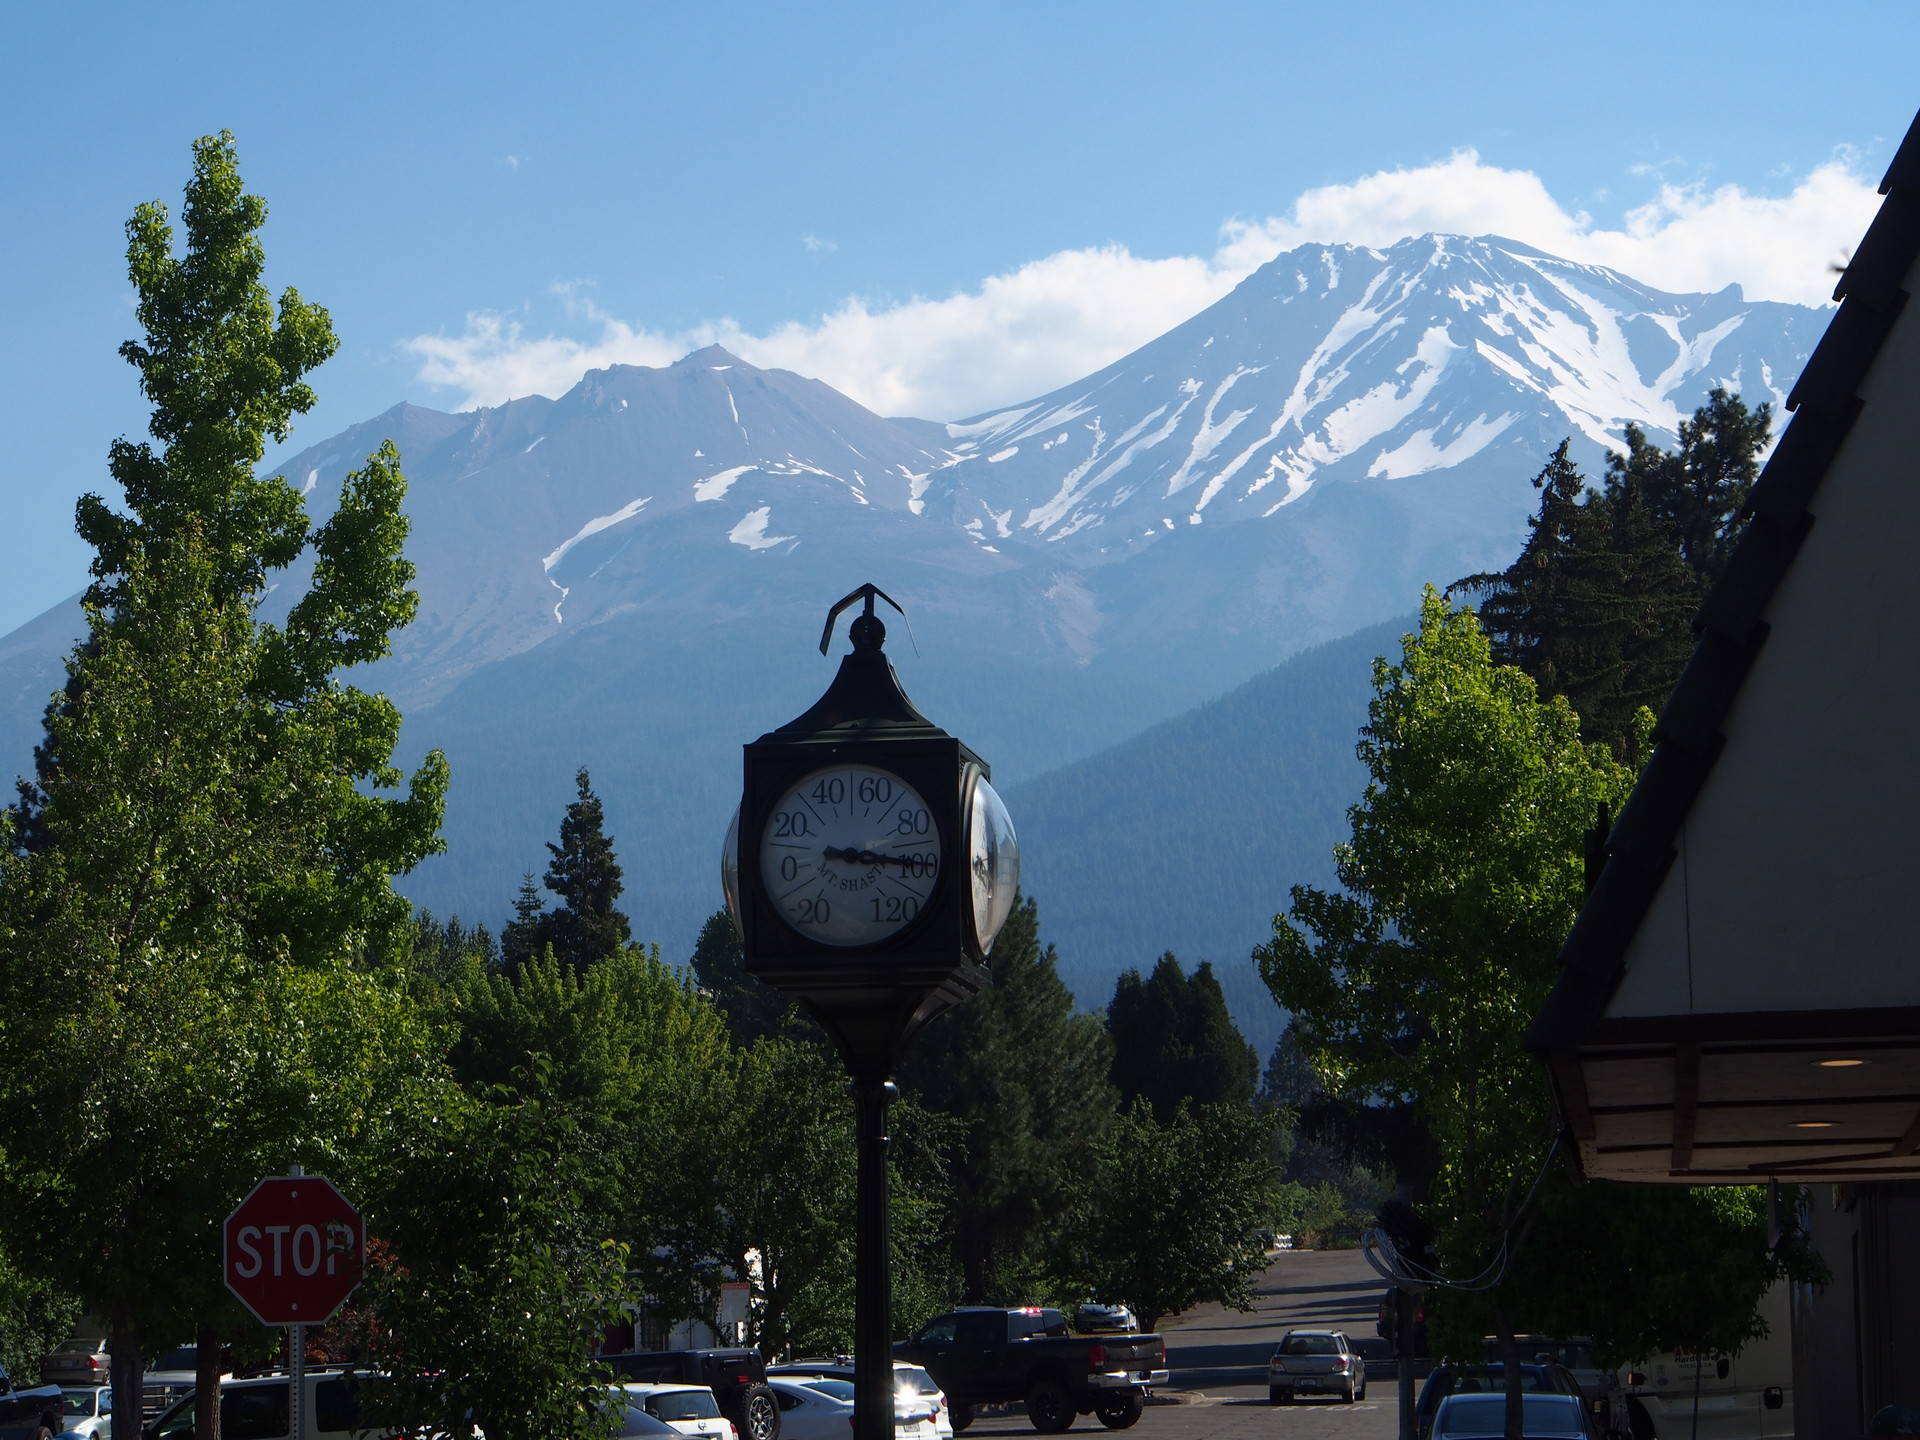 There are three main theories that explain the origin of the mysterious hole dug into Mount Shasta, and each theory tells a different story about the region’s history.  Cat Schuknecht/KQED